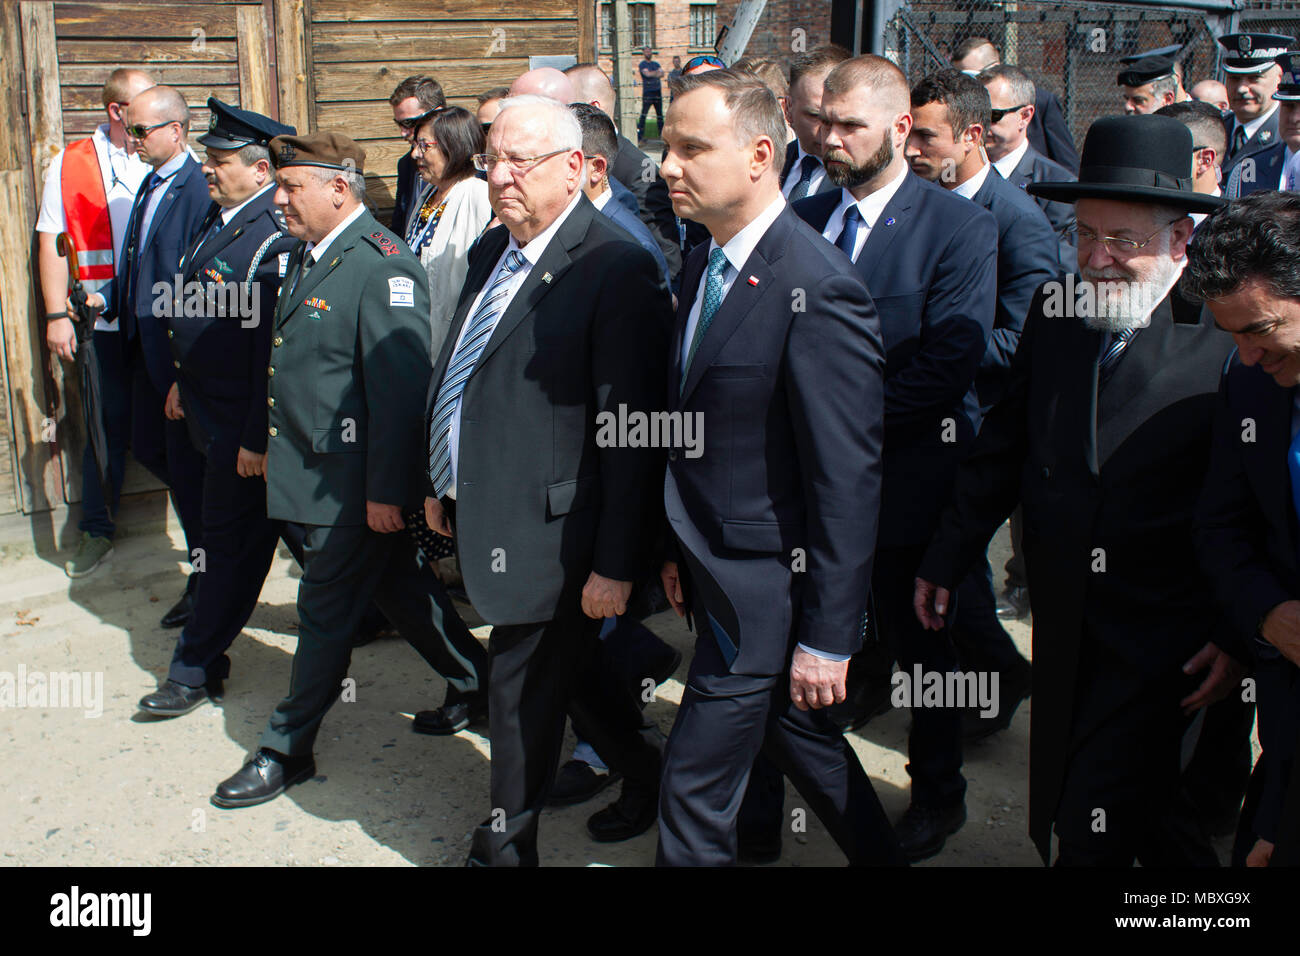 Oswiecim, Poland. 12th Apr 2018. March of the Living. Visit of the President of the Republic of Poland Andrzej Duda and Israeli President Reuven Rivlin to the March of the Living. An international event in which Jews from various countries, mainly students and students, visit the Holocaust sites that the Germans created during the war in the occupied Polish territories. Thanks to the participation in the March, young people will also learn about the history of Polish Jews, they also meet with Polish peers and Polish Righteous Among the Nations. Credit: Slawomir Kowalewski/Alamy Live News Stock Photo